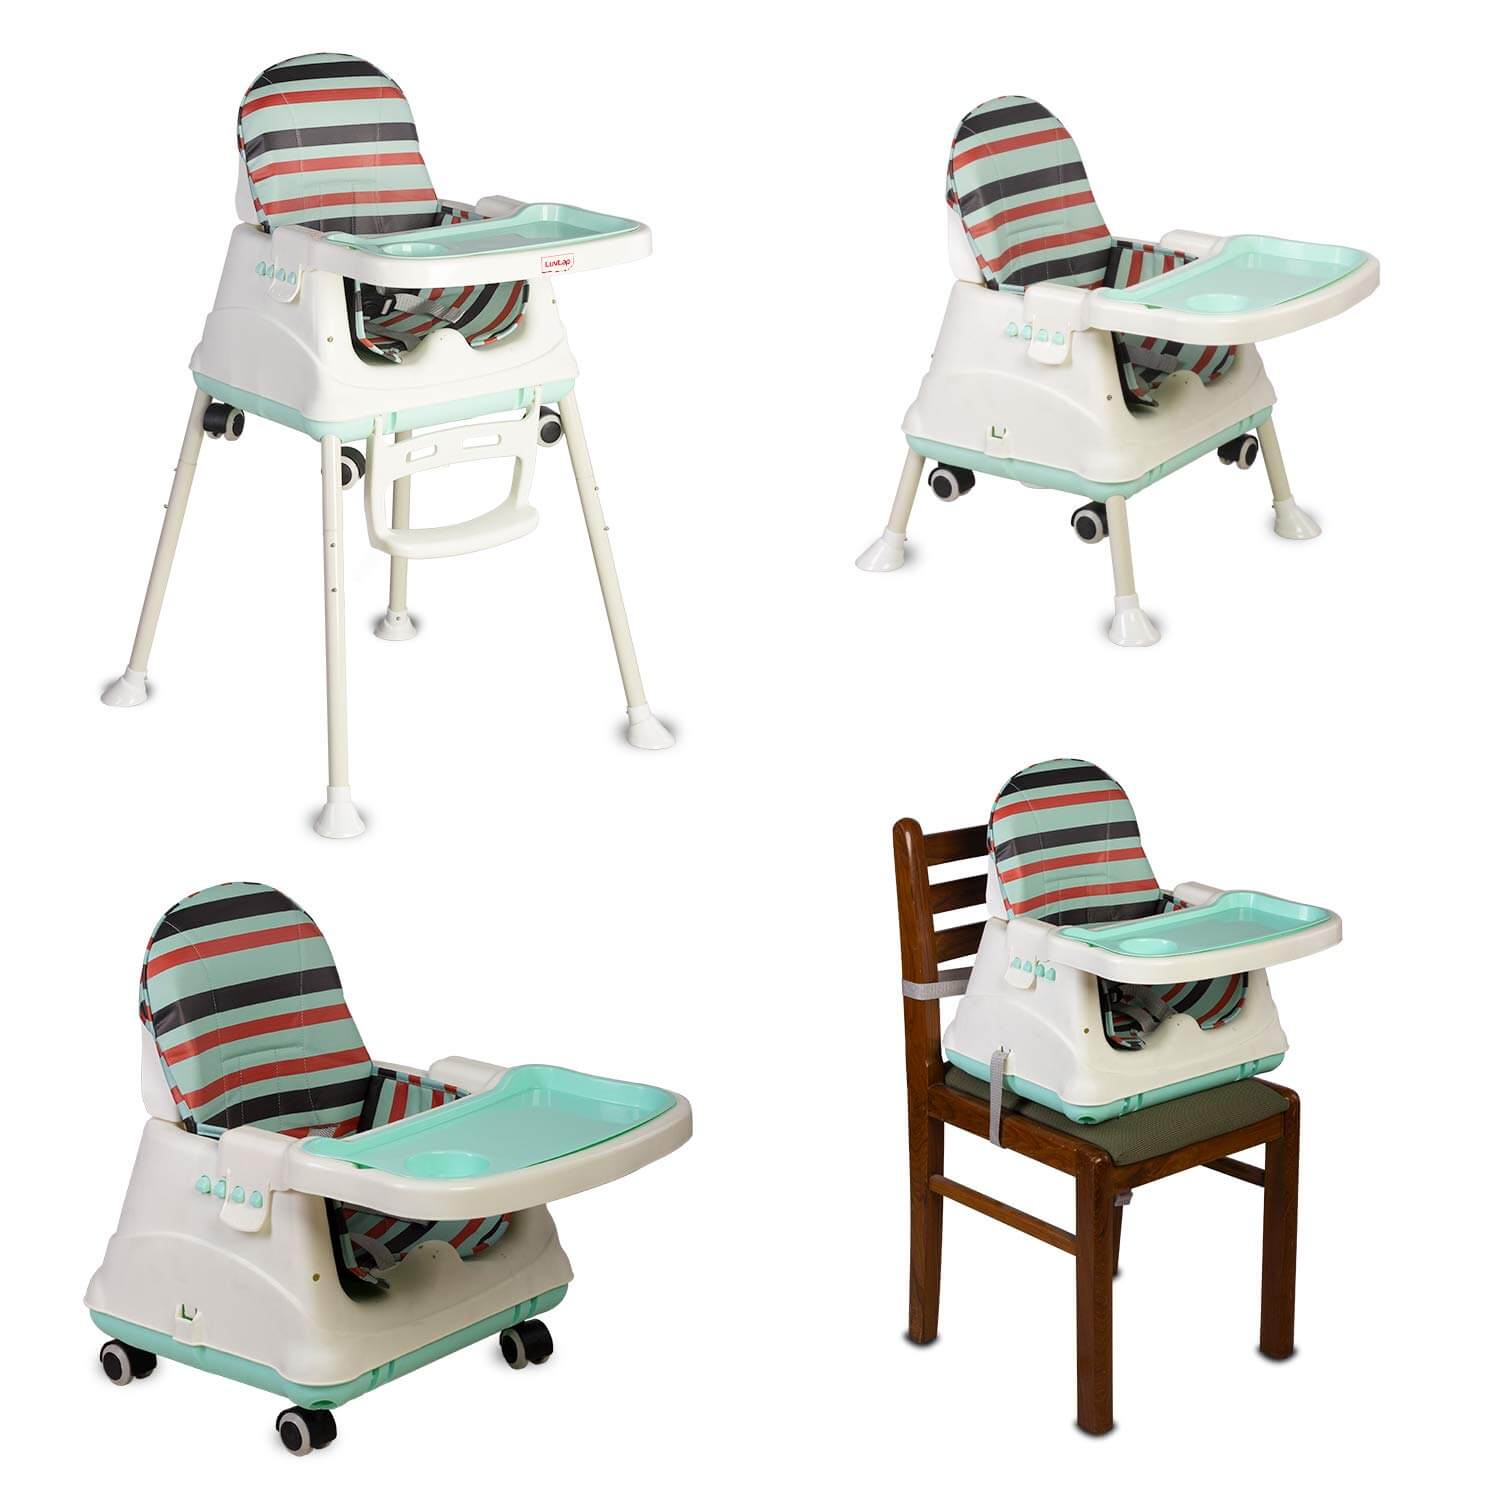 LuvLap 4in1 High Chair for Baby/Kids